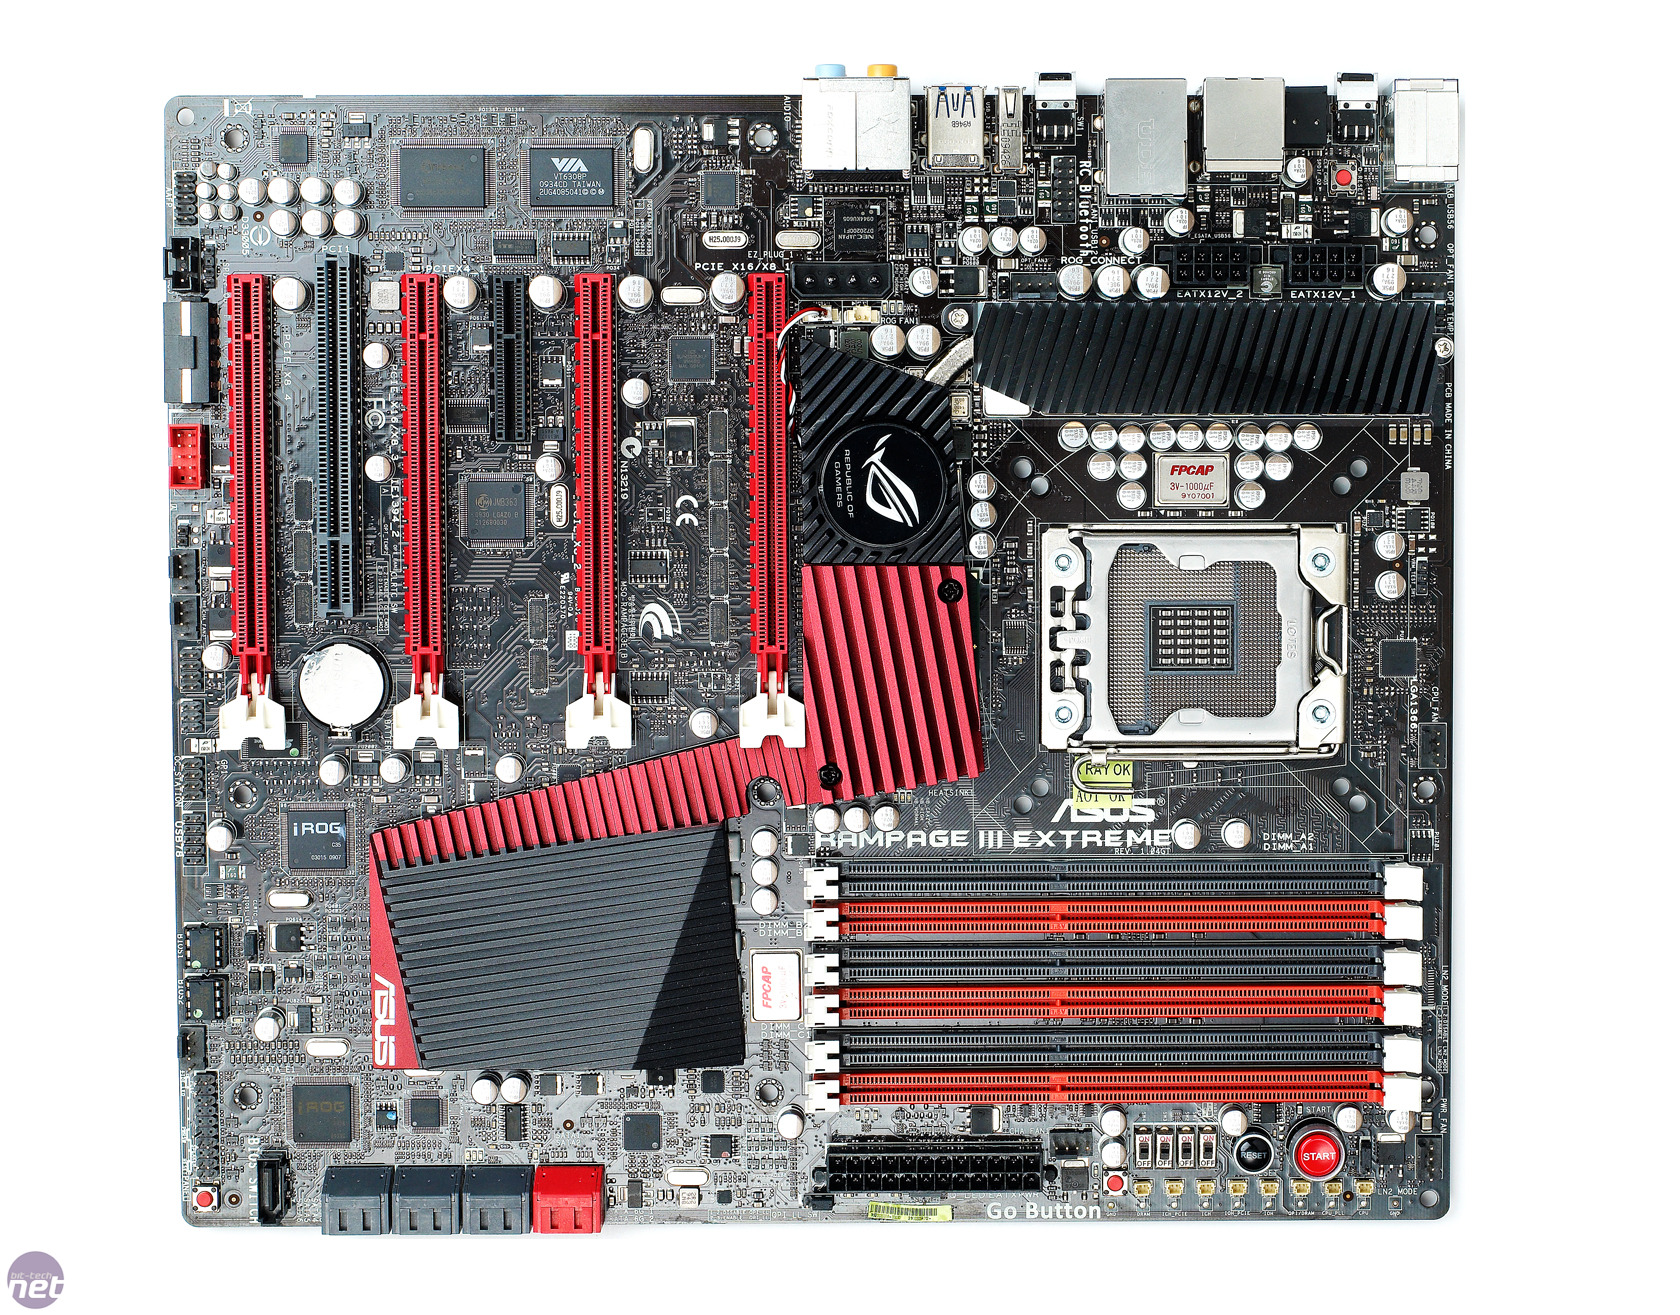 Asus Rampage III Extreme PCI-E slots and power cables , need some